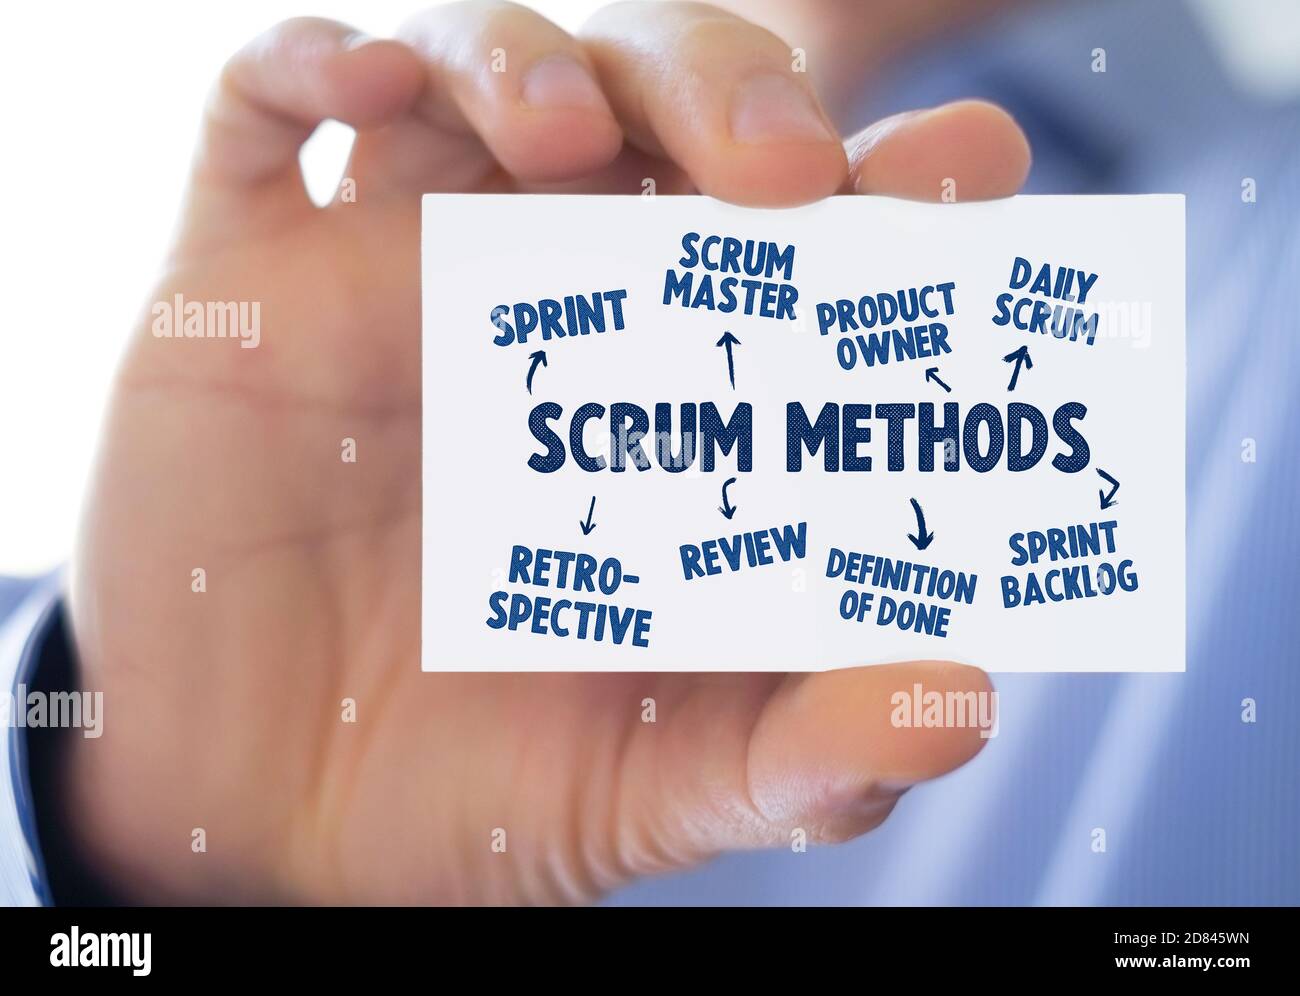 Scrum management process - business card Stock Photo